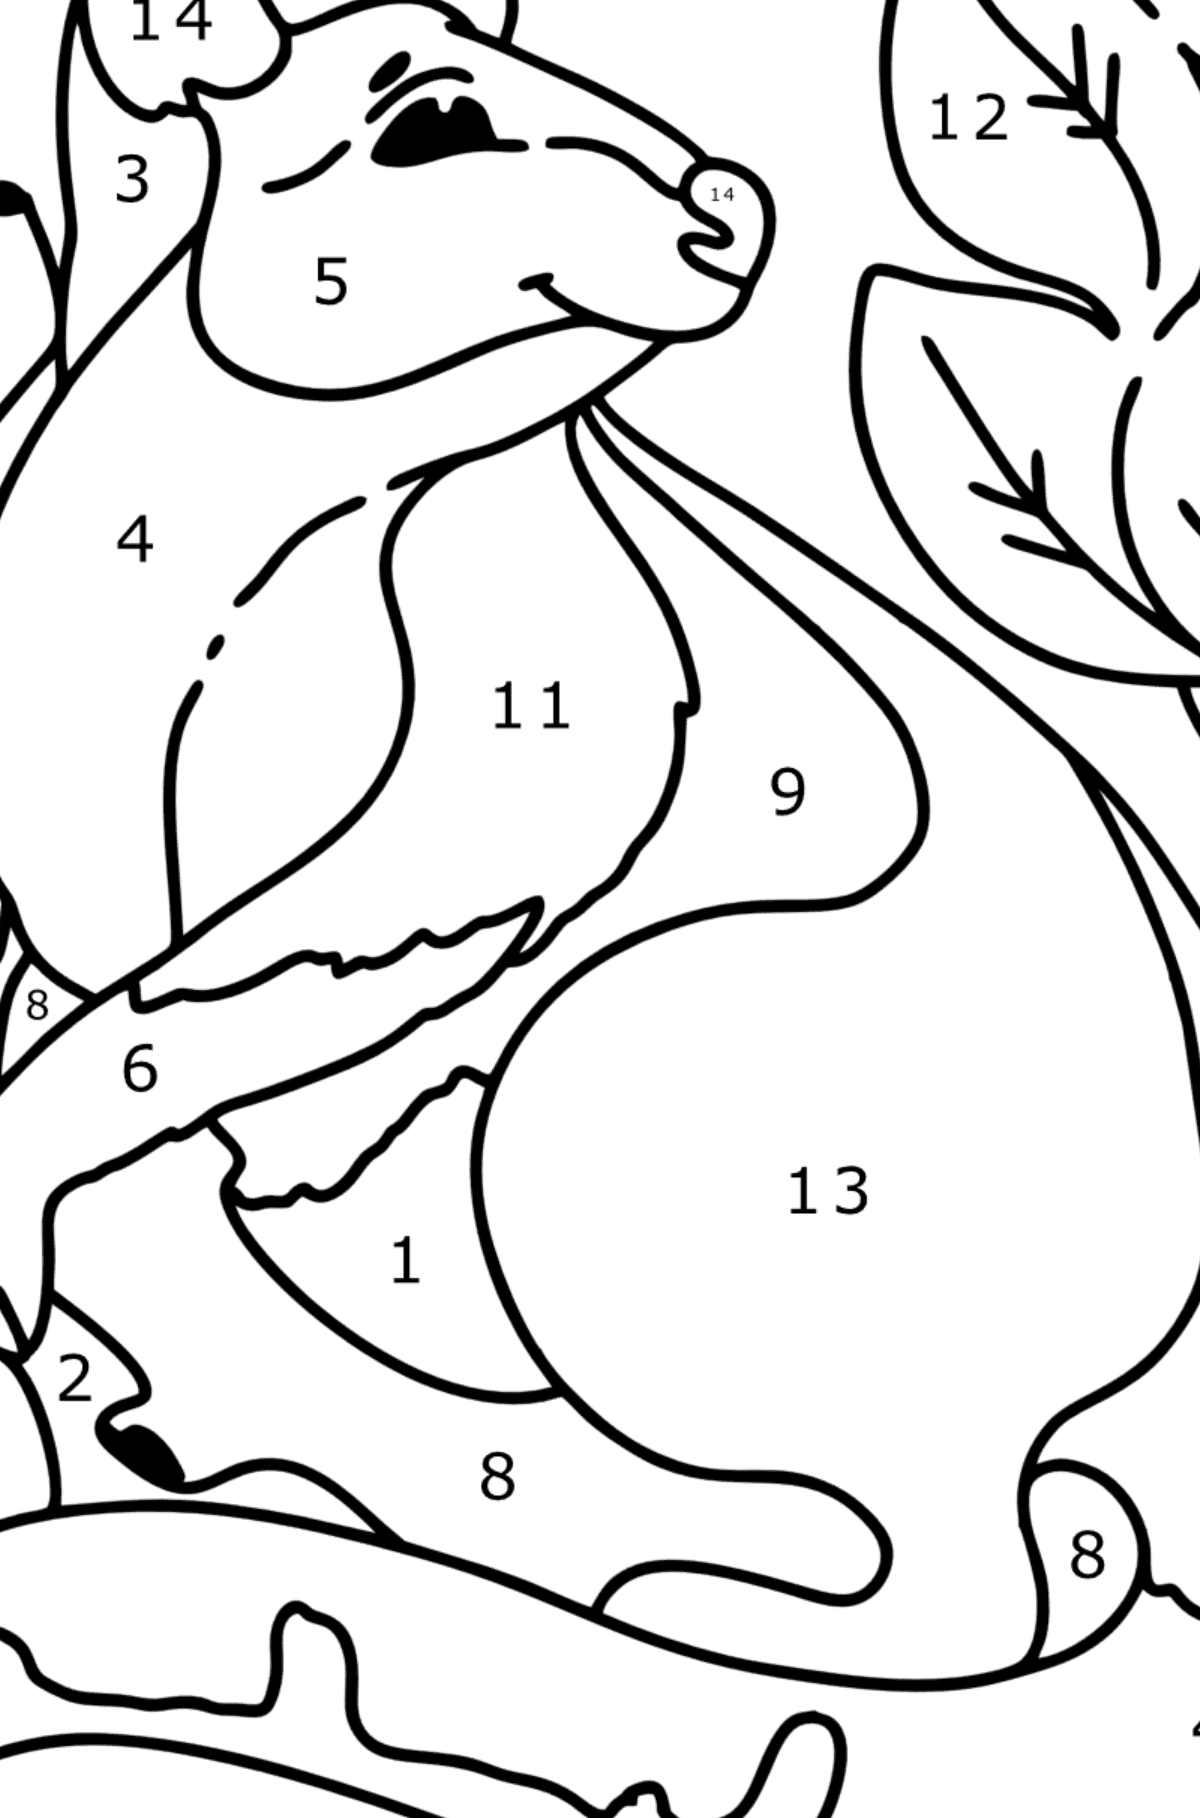 Coloring page - Tree Kangaroo - Coloring by Numbers for Kids